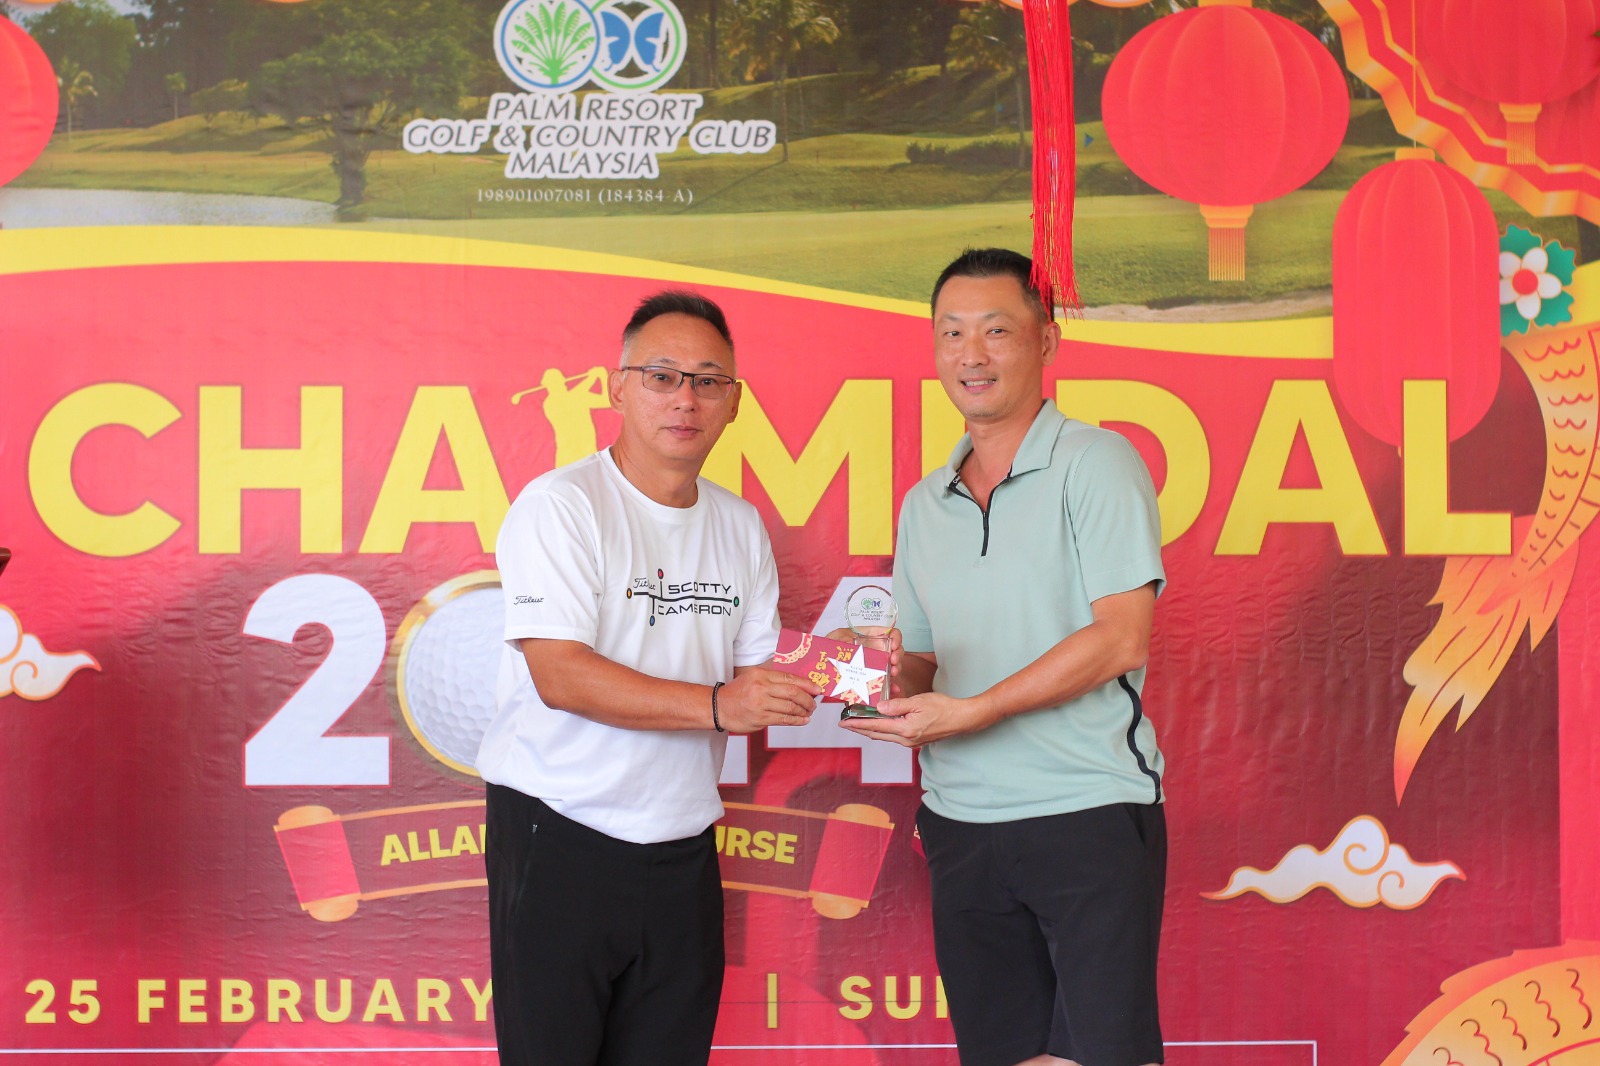 B DIVISION - 3RD PLACING LEE CHUIN MIAN